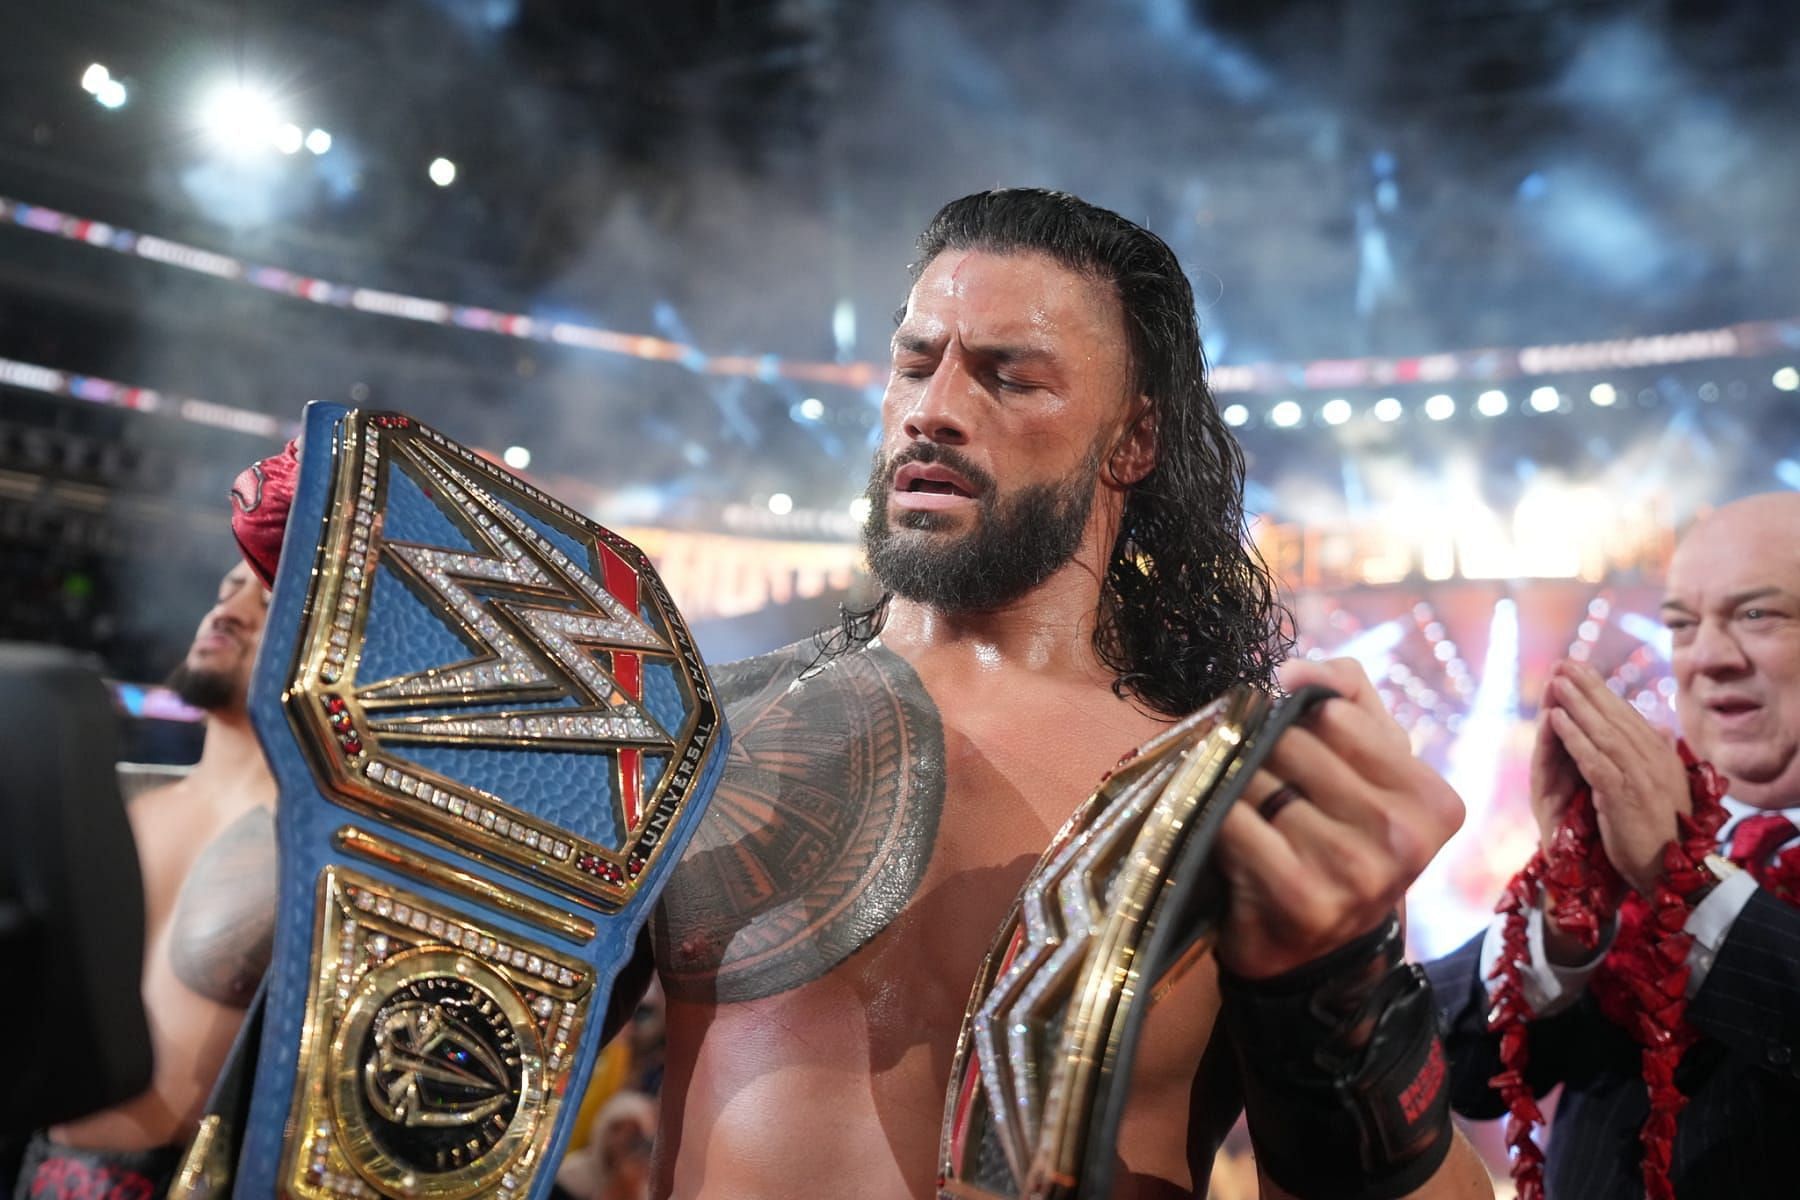 Roman Reigns had had some nail-biting title matches as Undisputed Champion.